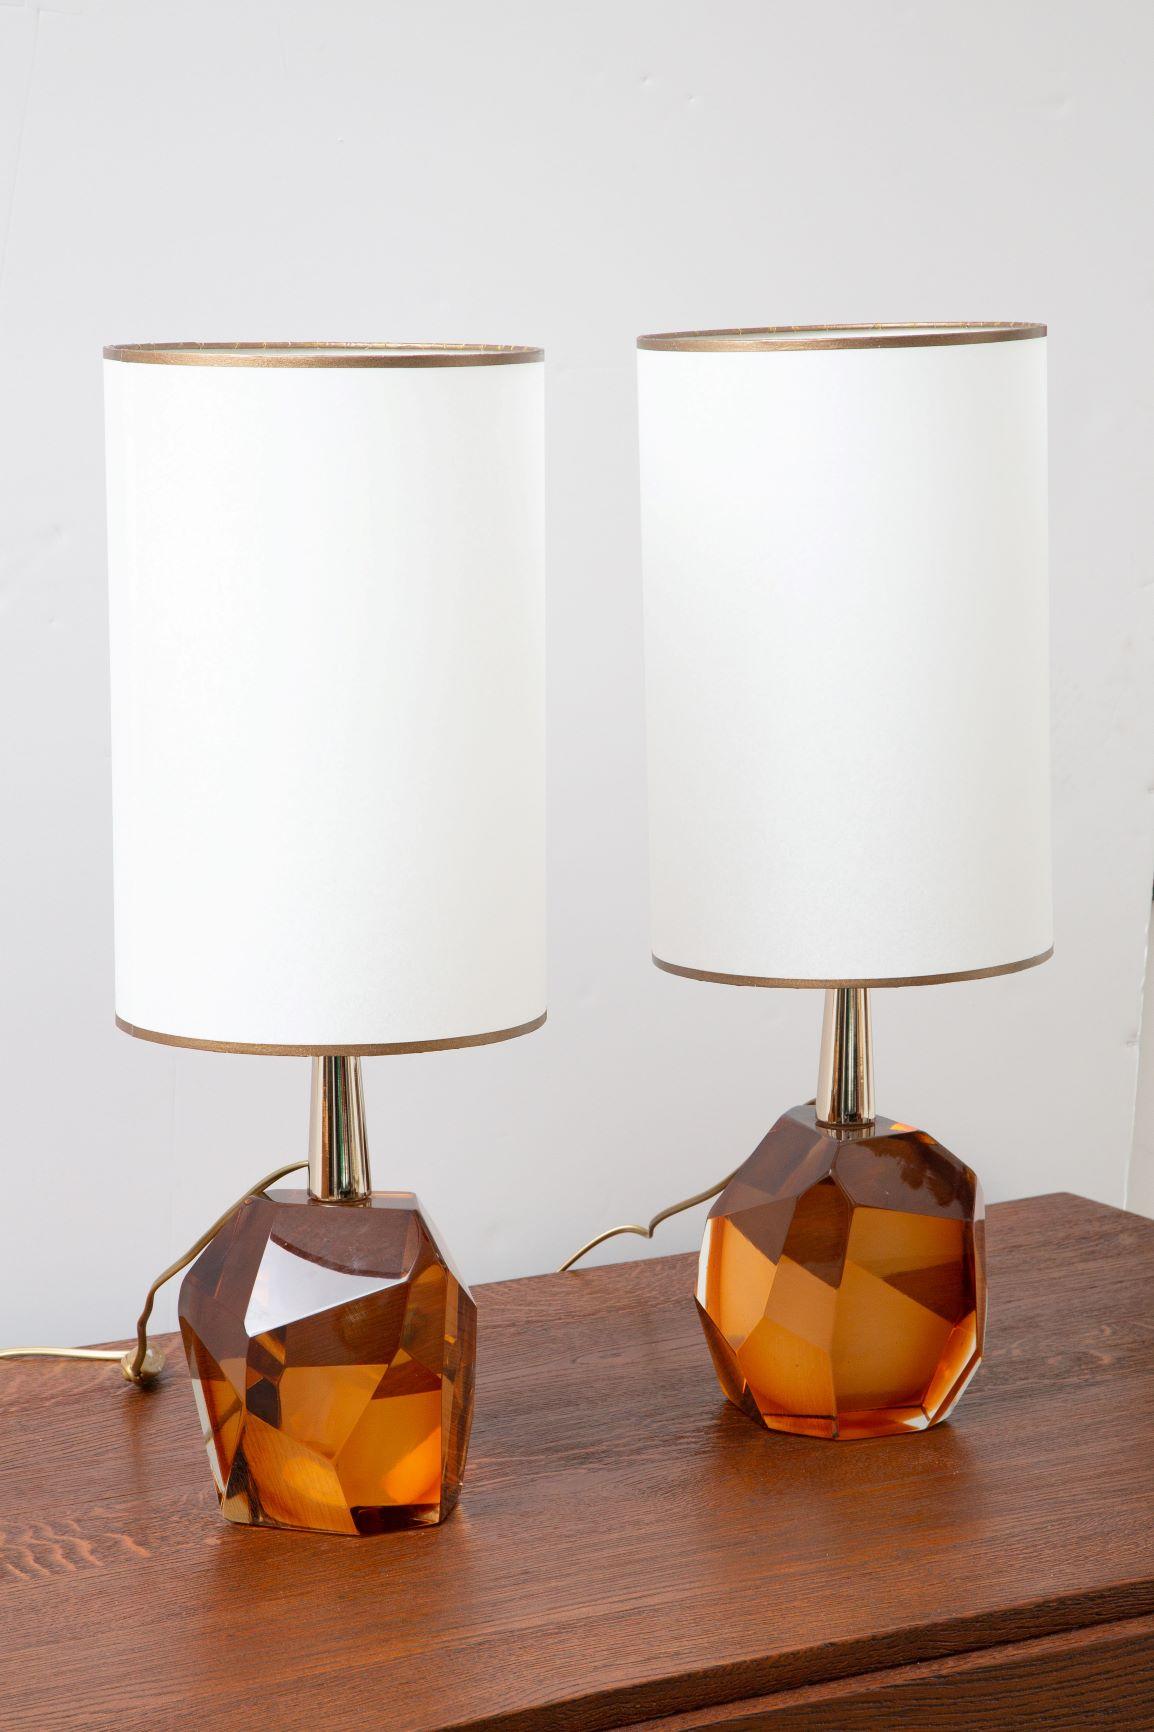 Pair of faceted diamond table lamps, in stock
Studio-made heavy solid rock translucent Murano glass
Amber hue
Custom made parchment shades included.
Located in our store in Miami ready for shipping now.

Shades are included
Wired to the US